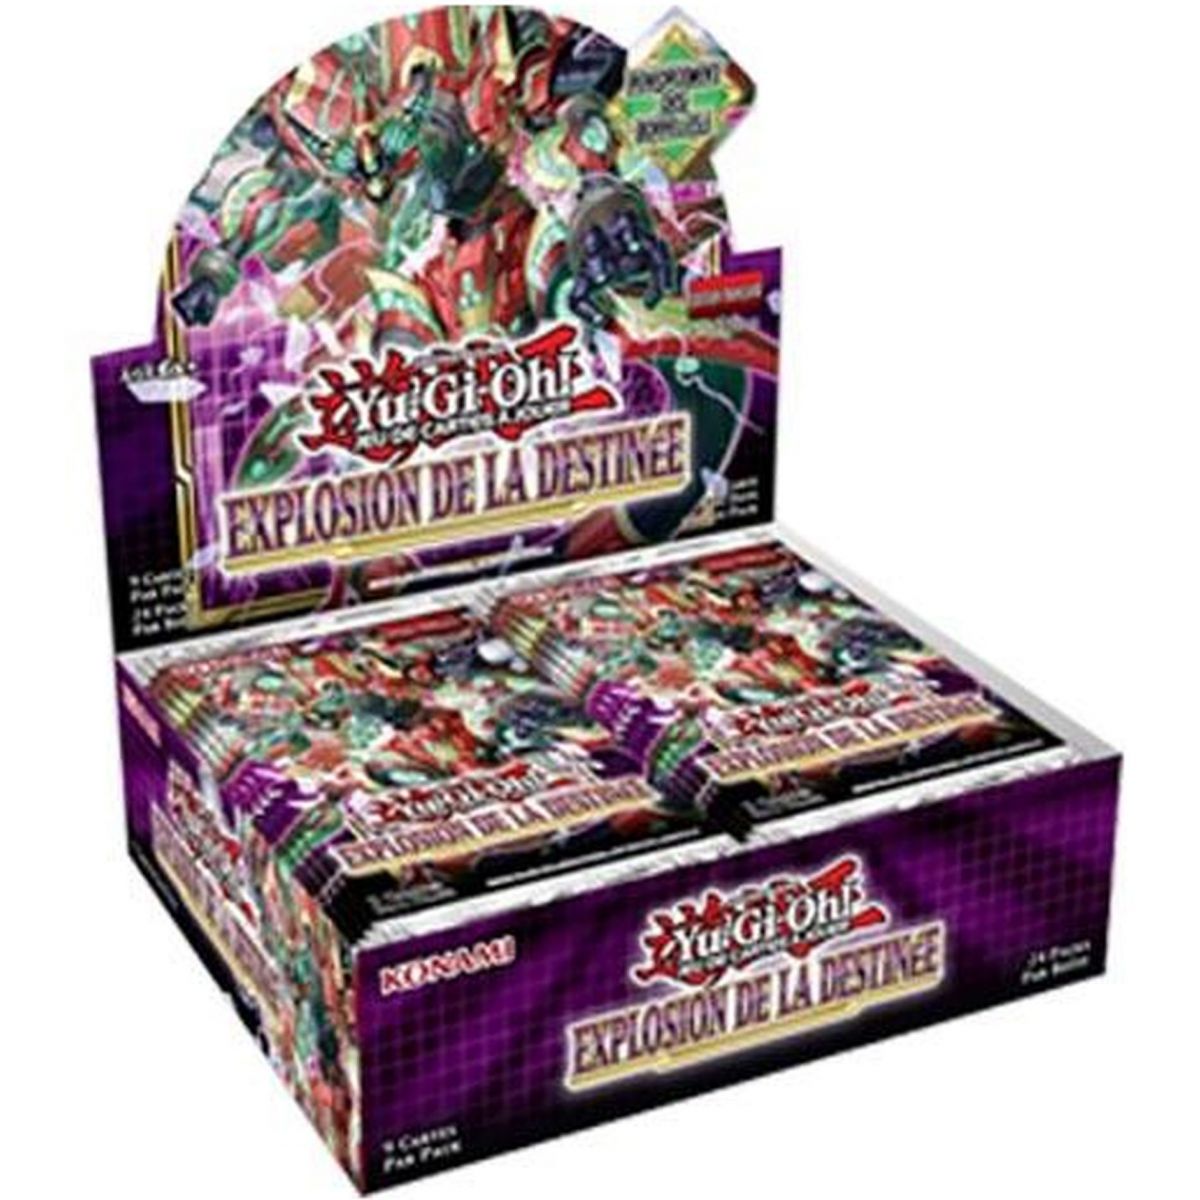 Yu Gi Oh! - Display - Box of 24 Boosters - Explosion of Destiny - FR